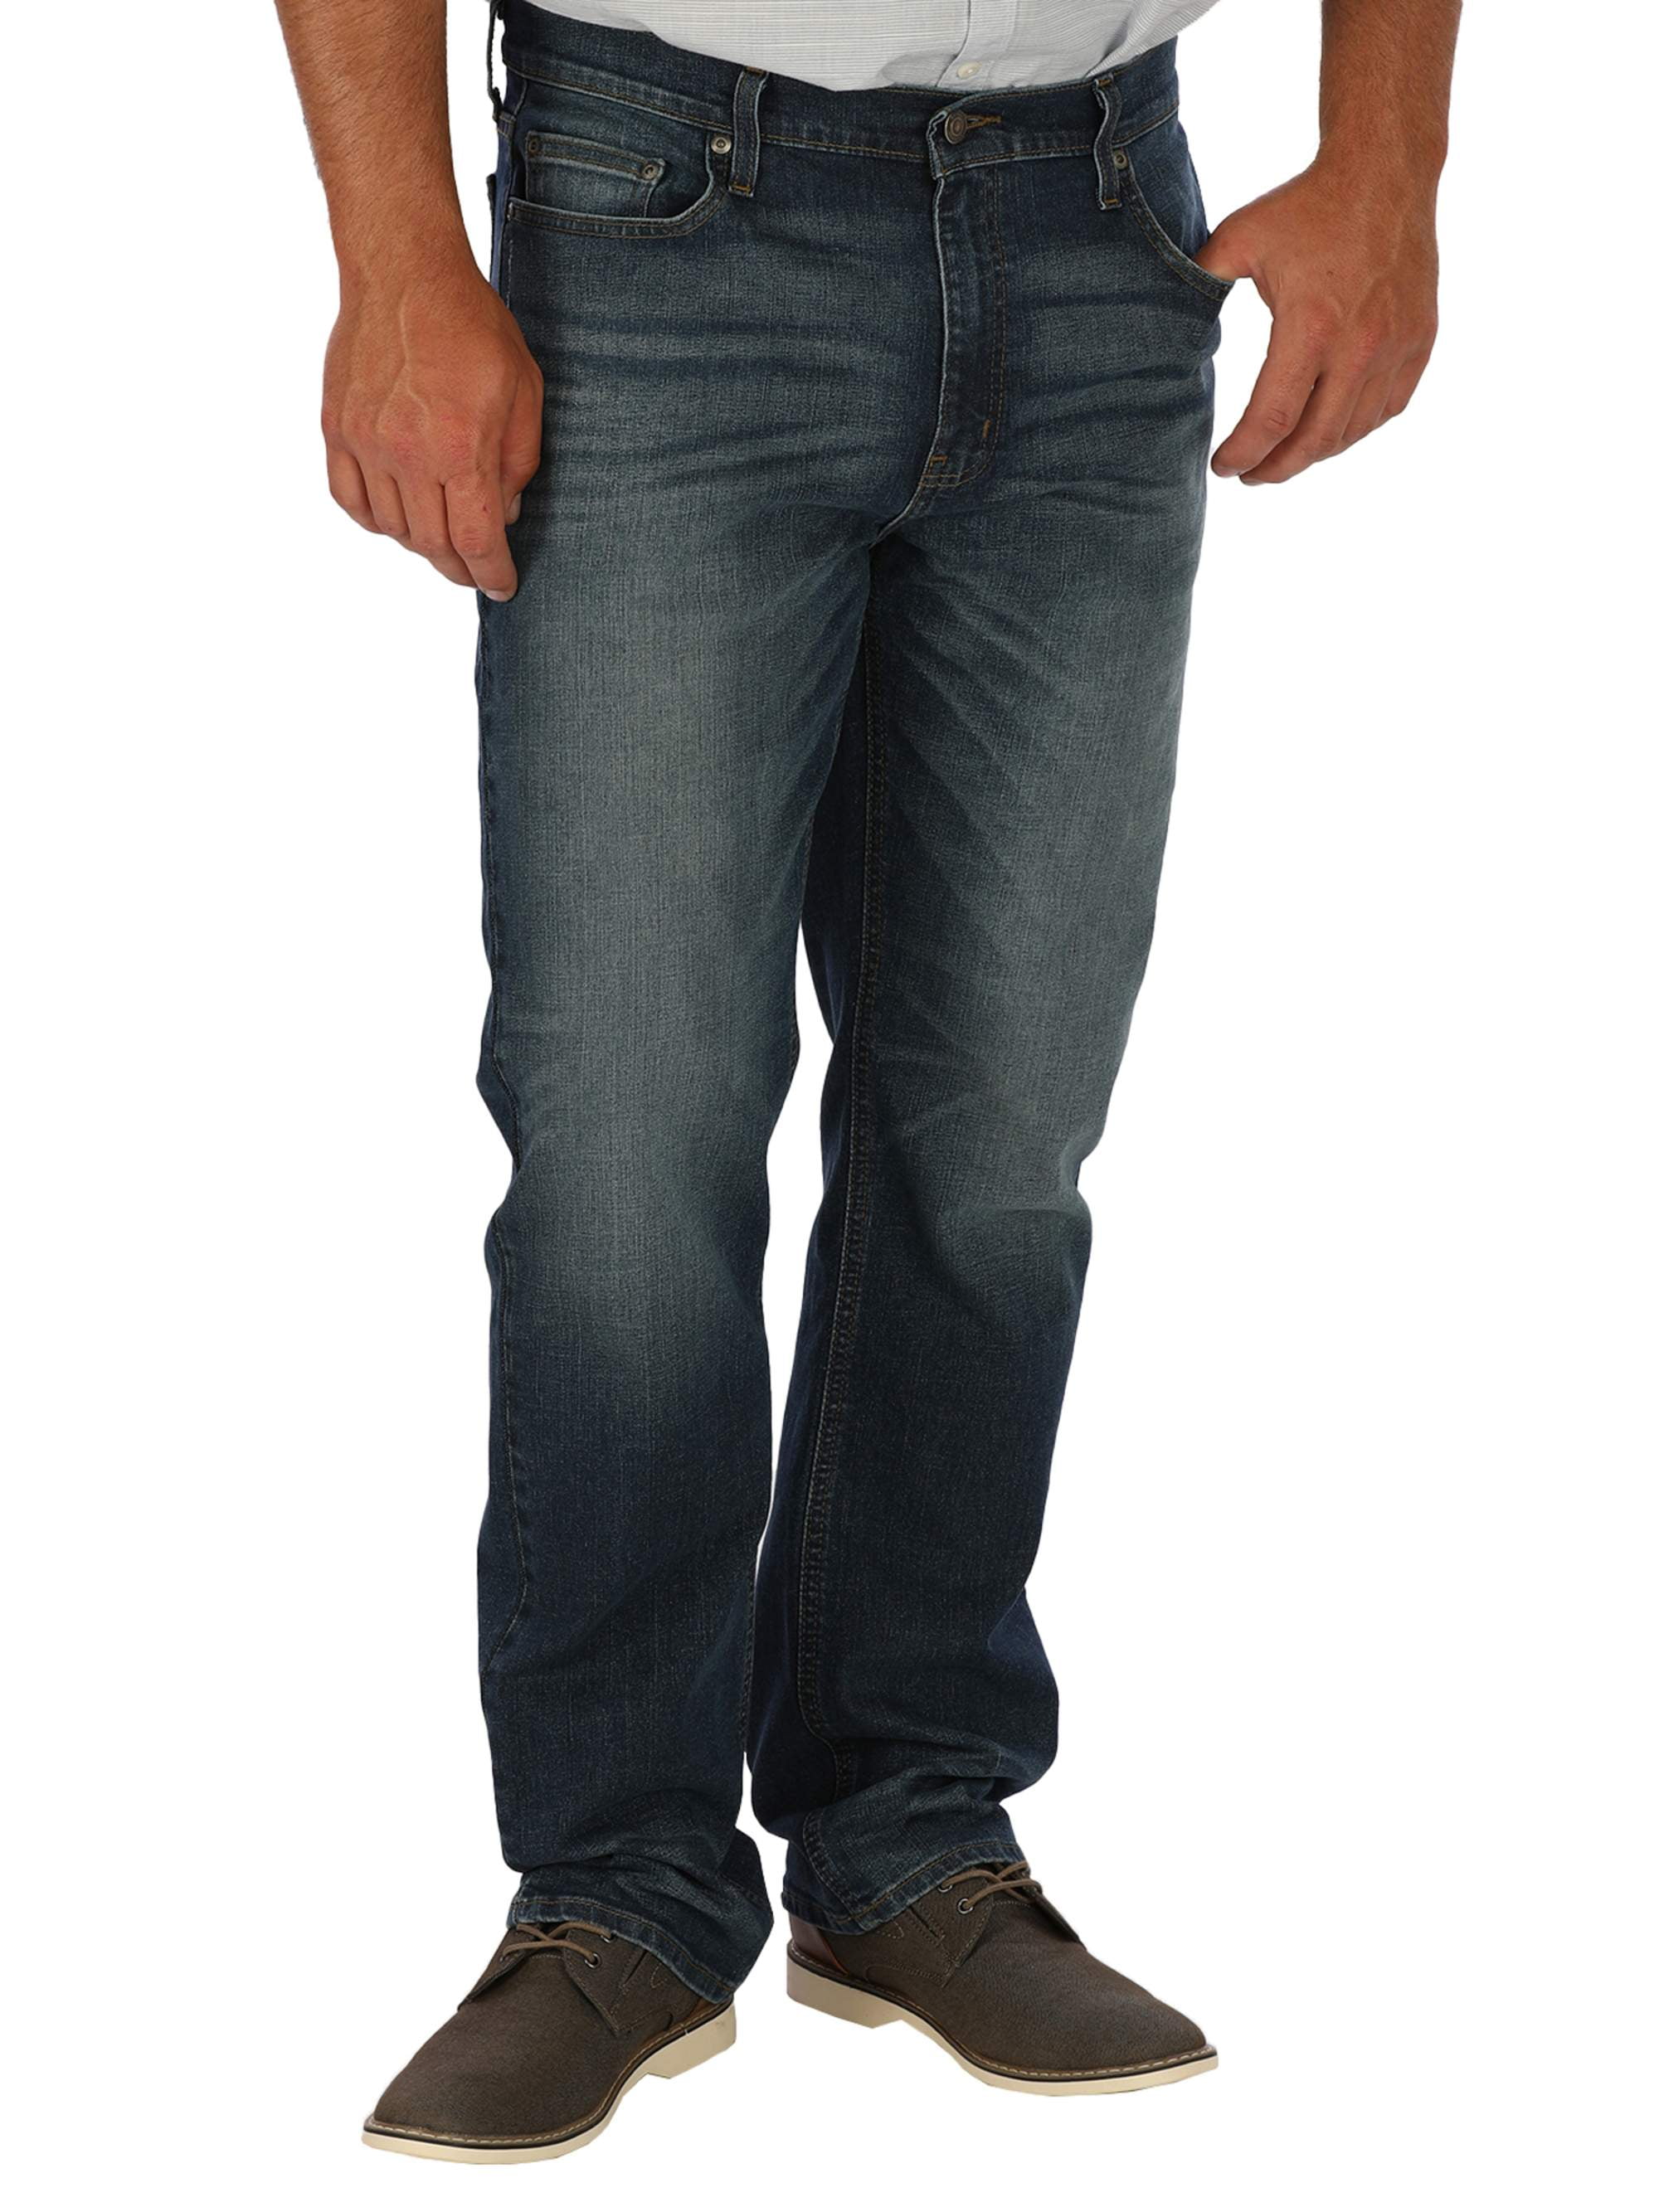 New Walmart George Jeans - clothing & accessories - by owner